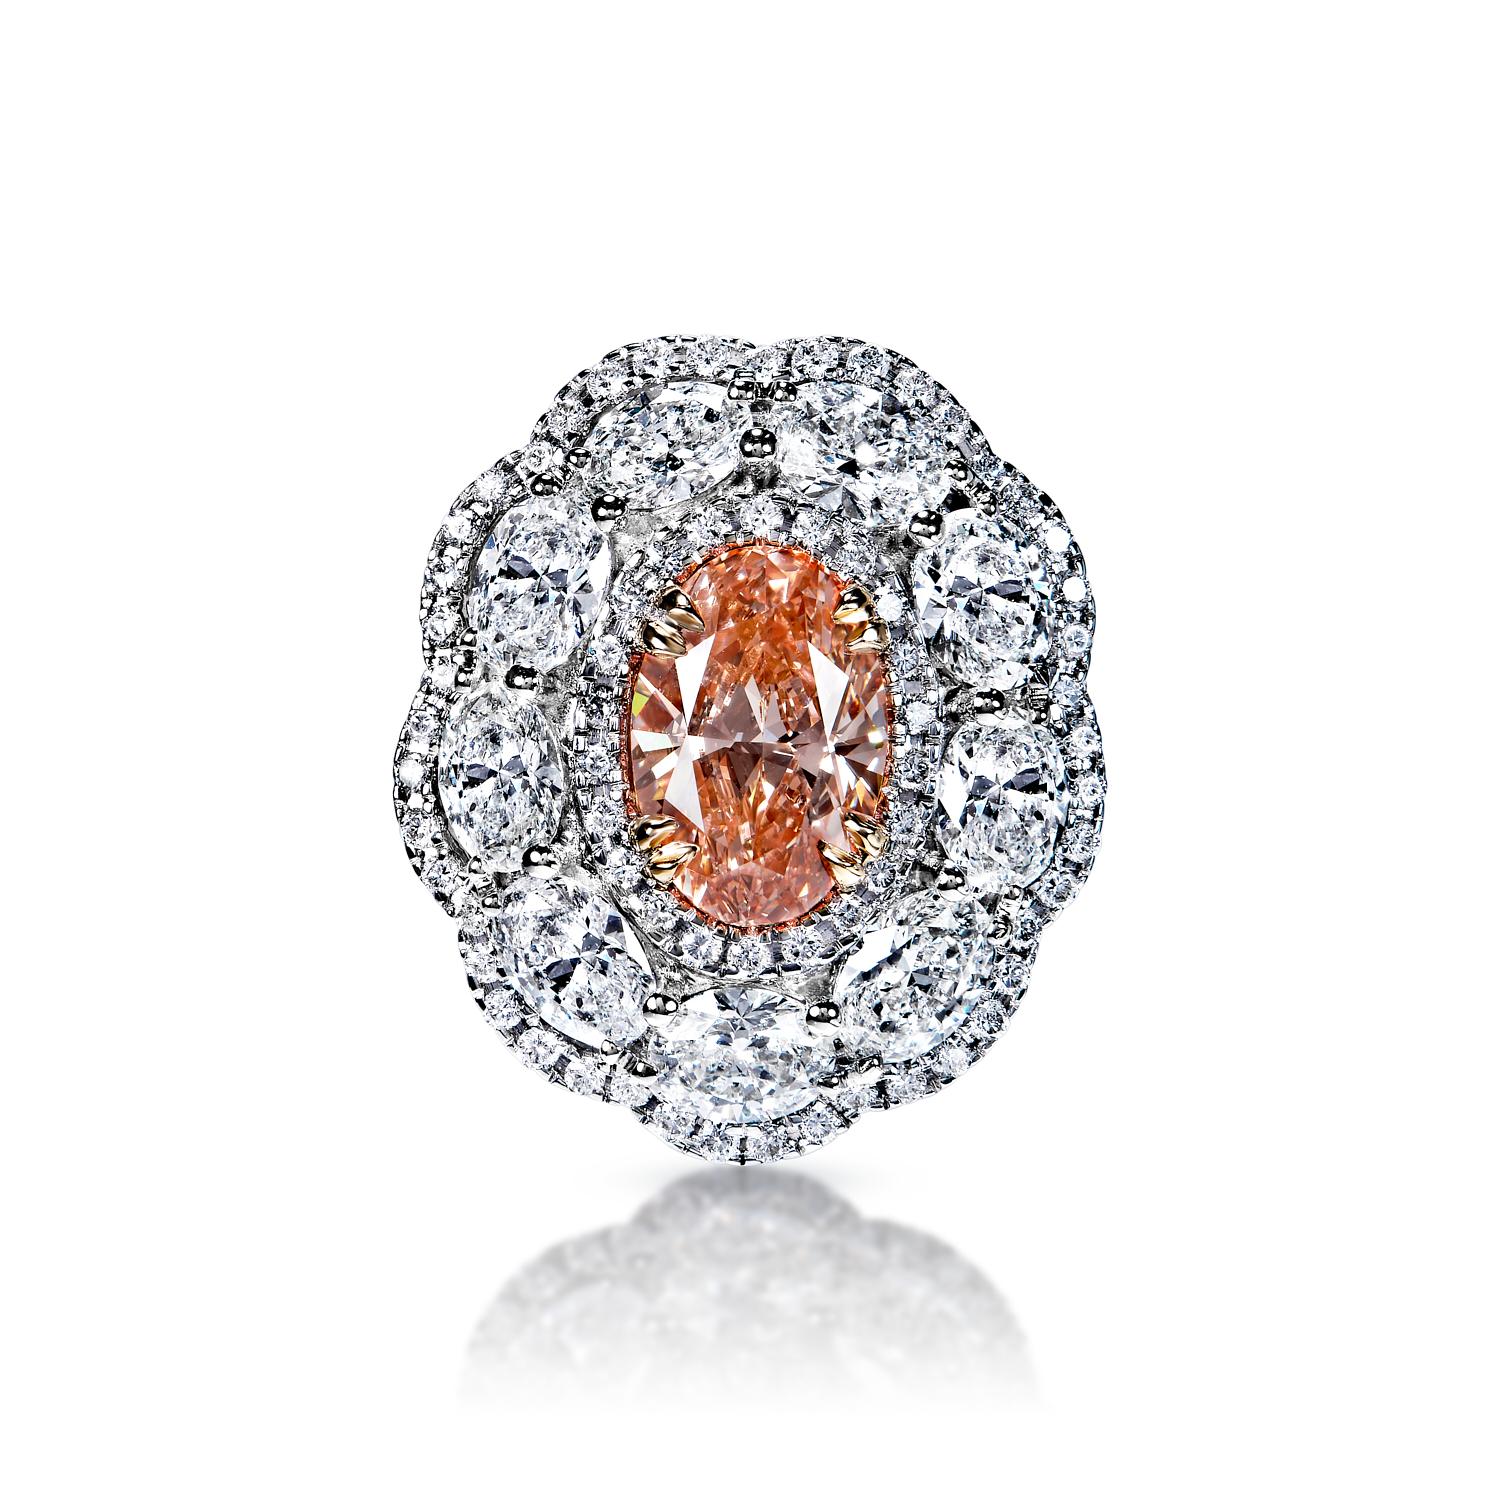 Elliott 6 Carat Fancy Orangy Pink VS1 Oval Cut Diamond Engagement Ring in 18k White Gold By Mike Nekta

 

GIA CERTIFIED
Center Diamond:

Carat Weight: 2.02 Carats
Color : Fancy Intense Orangy Pink*
Clarity: VS1
Style: Oval Cut
*This Diamond has